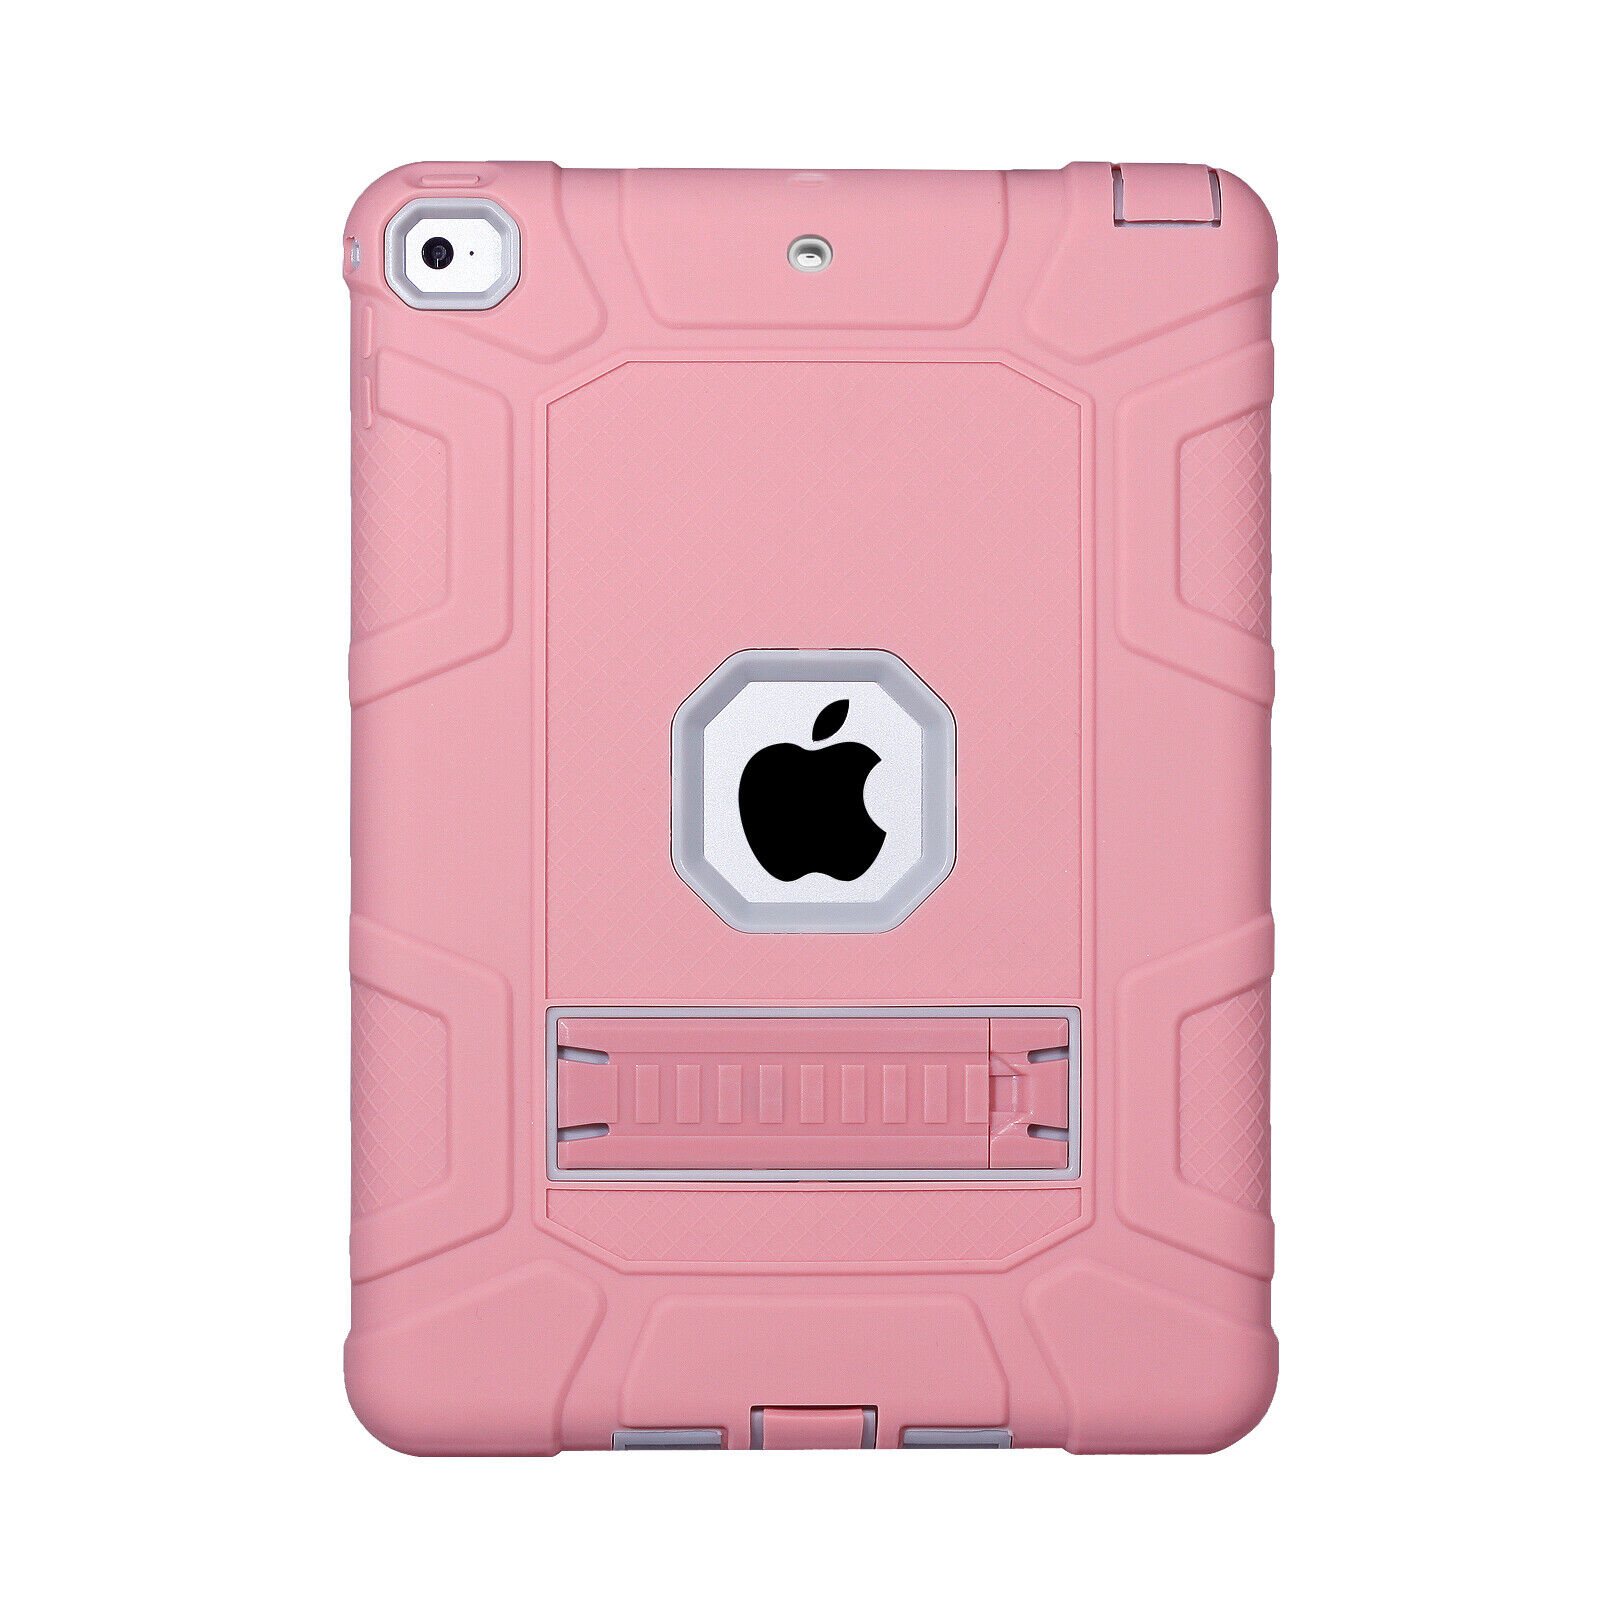 Kids Tough Case For iPad Mini 2 3 4 5th 6th Gen Air3 10.5 Shockproof Stand Cover